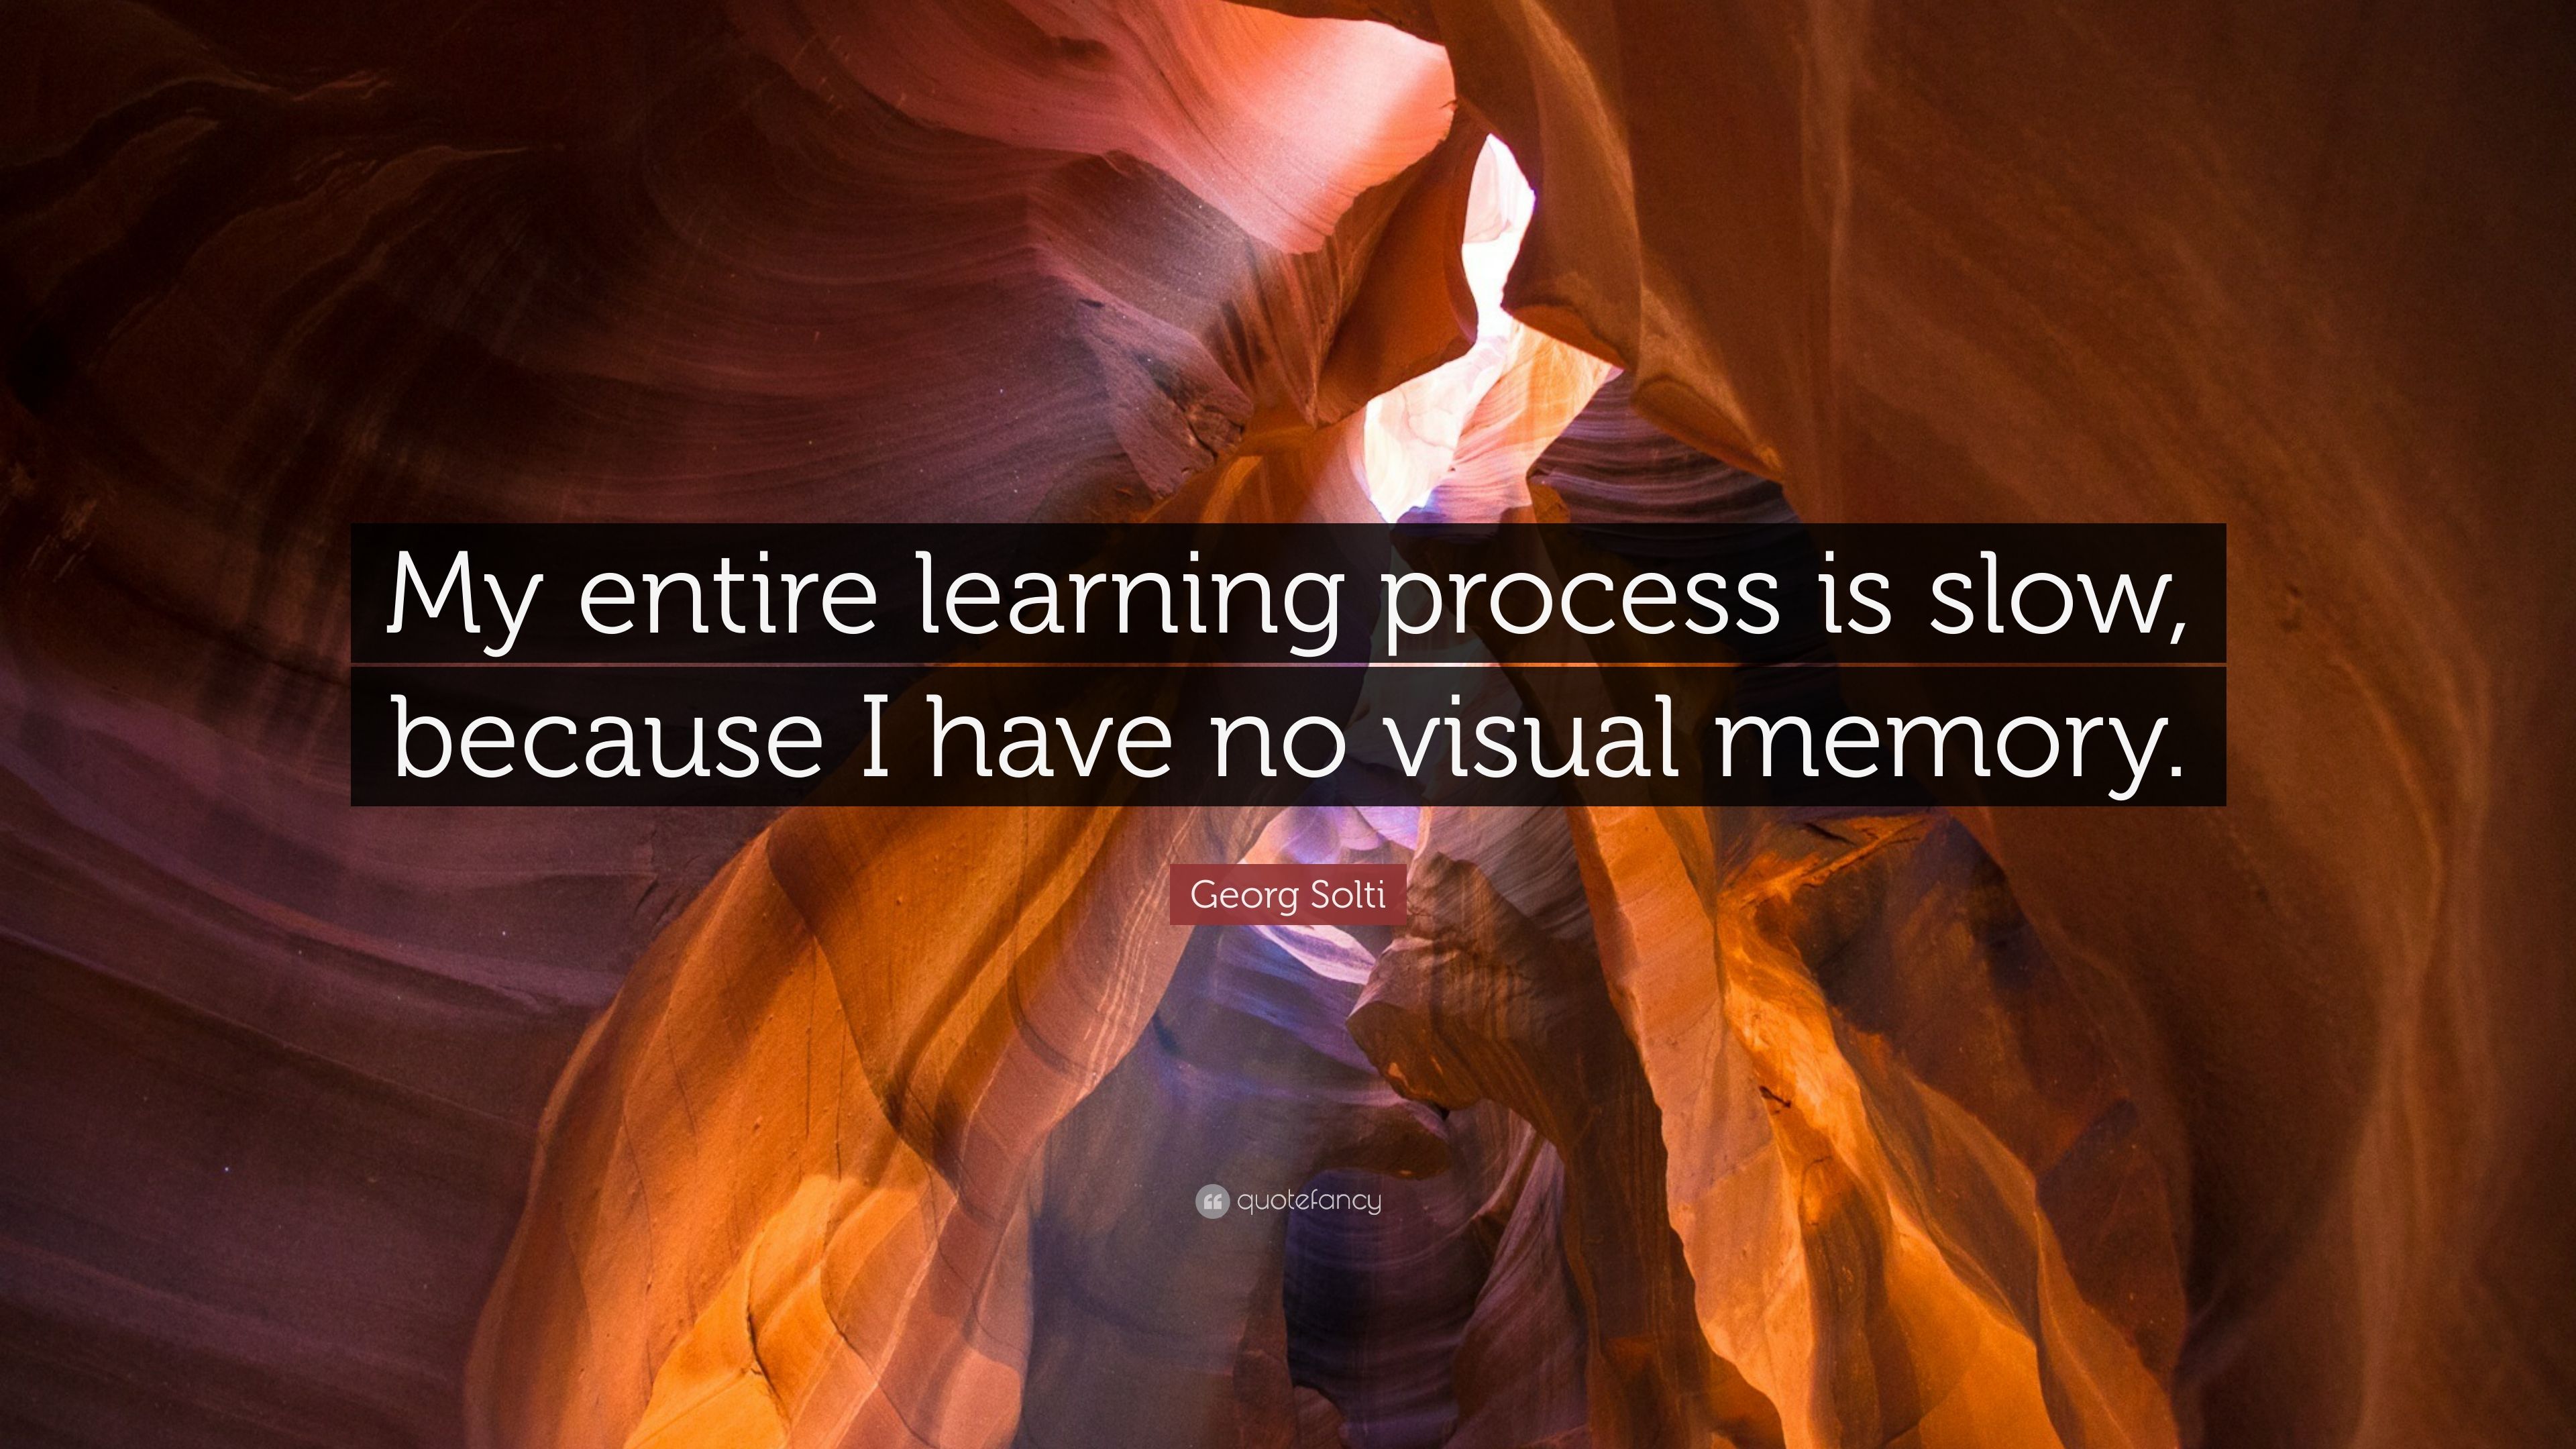 Georg solti quote âmy entire learning process is slow because i have no visual memoryâ